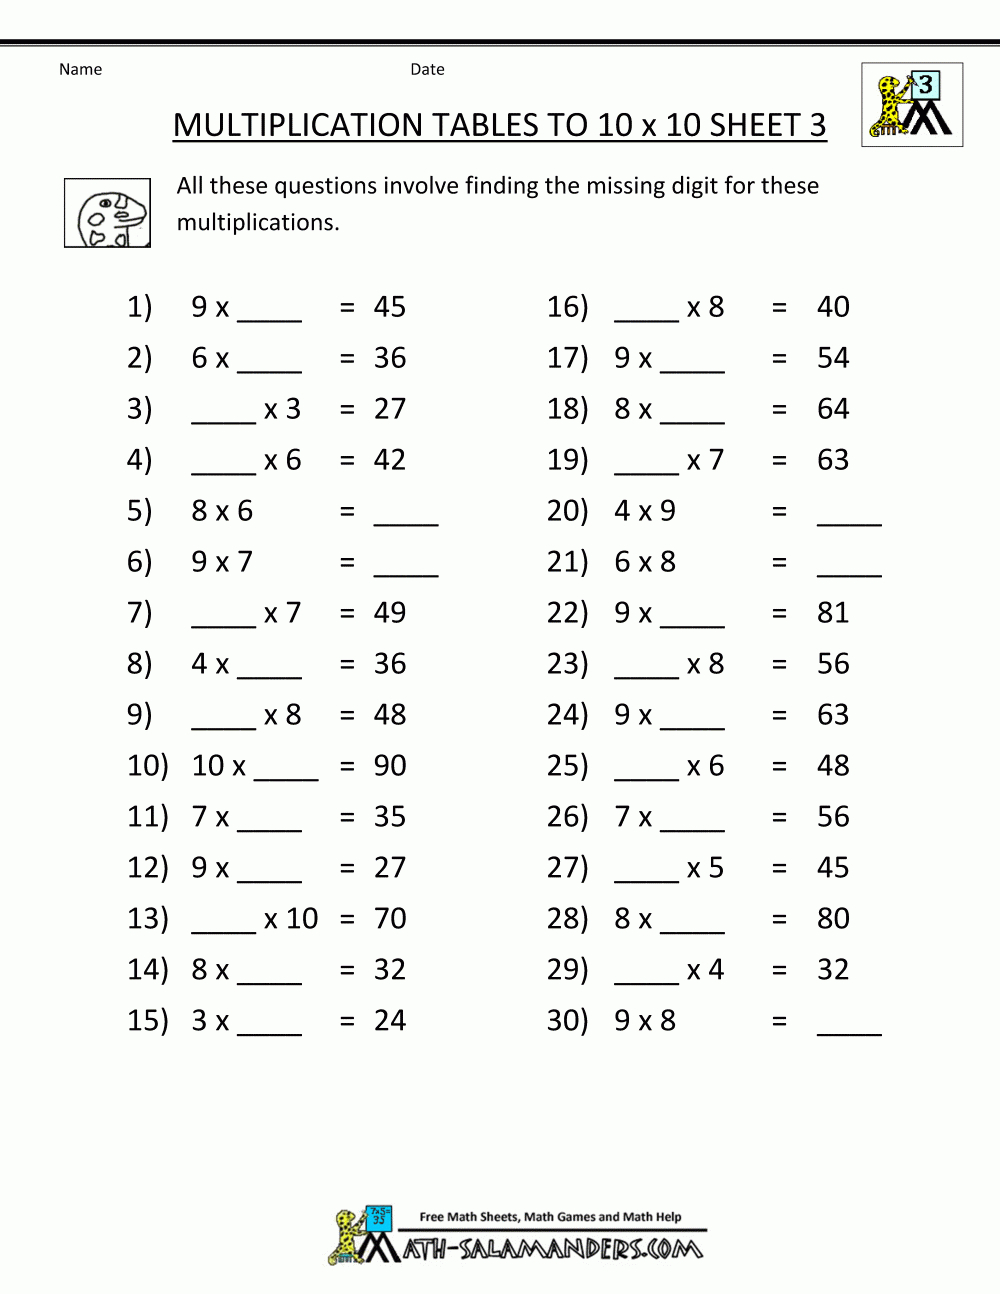 Multiplication Table Worksheets To 10X10 3 | Math Worksheets inside Multiplication Worksheets 8X